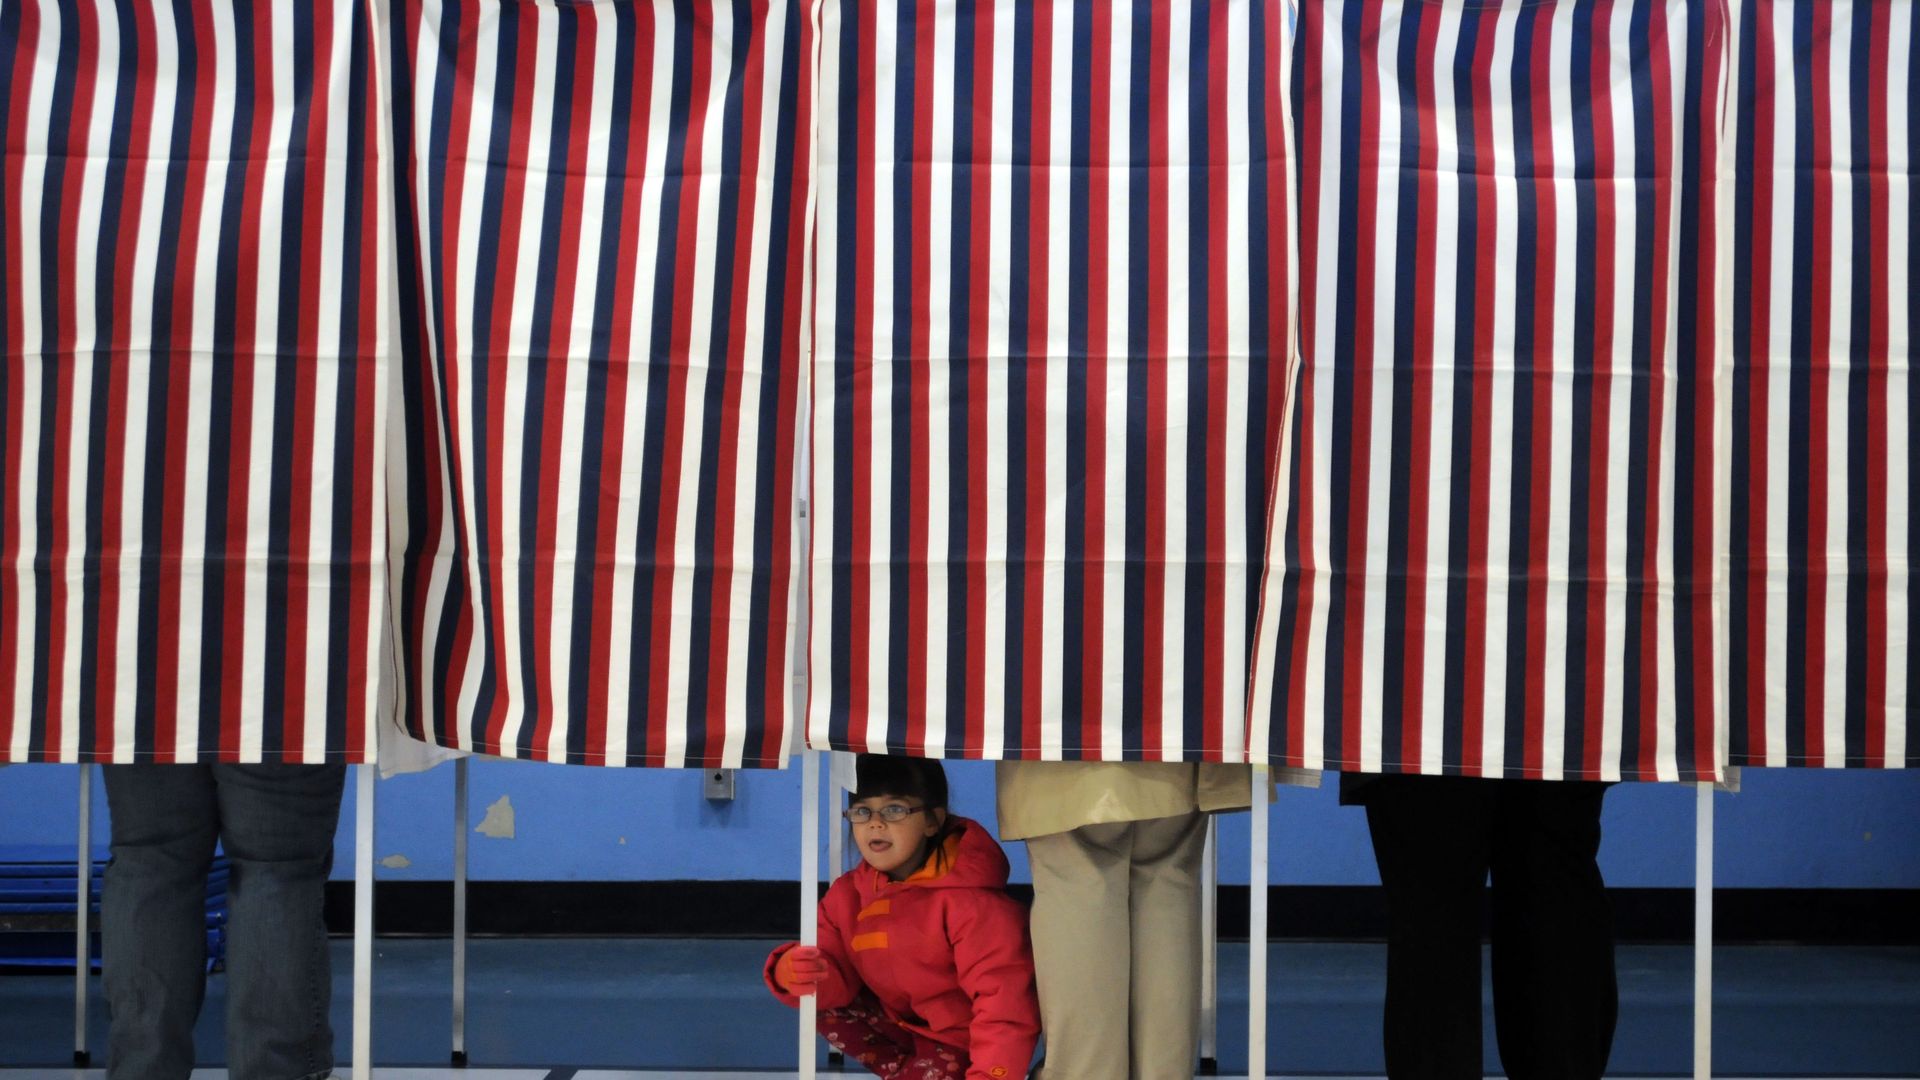 Poll booths with red, white, and blue curtains, while people vote.